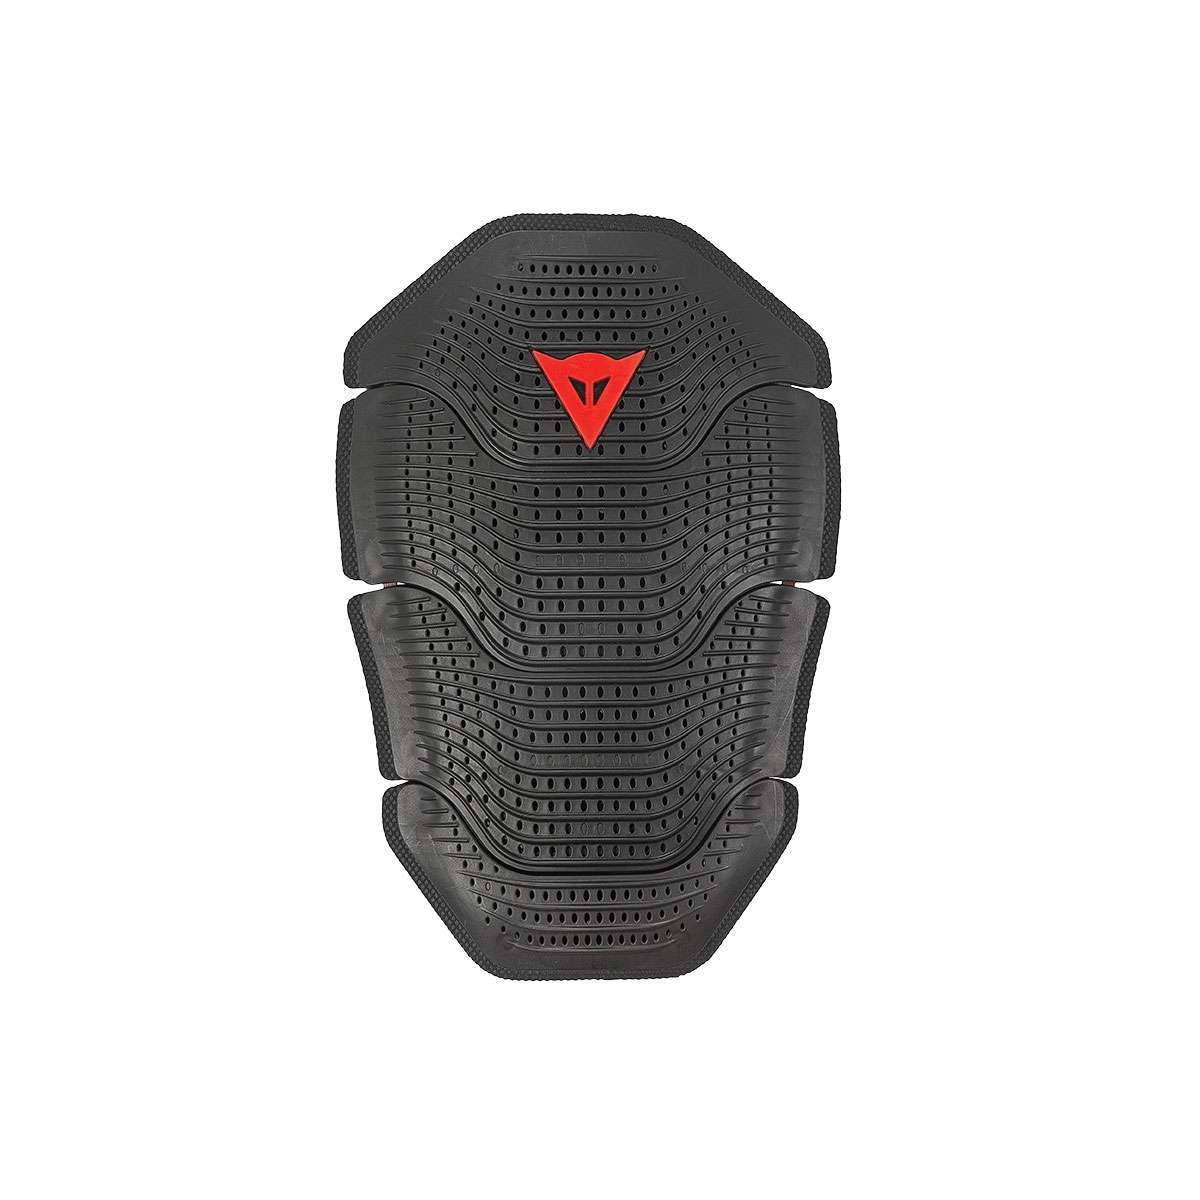 Dorsale dainese manis d1 g1 Dainese, Motoshopping : vente Protections ...